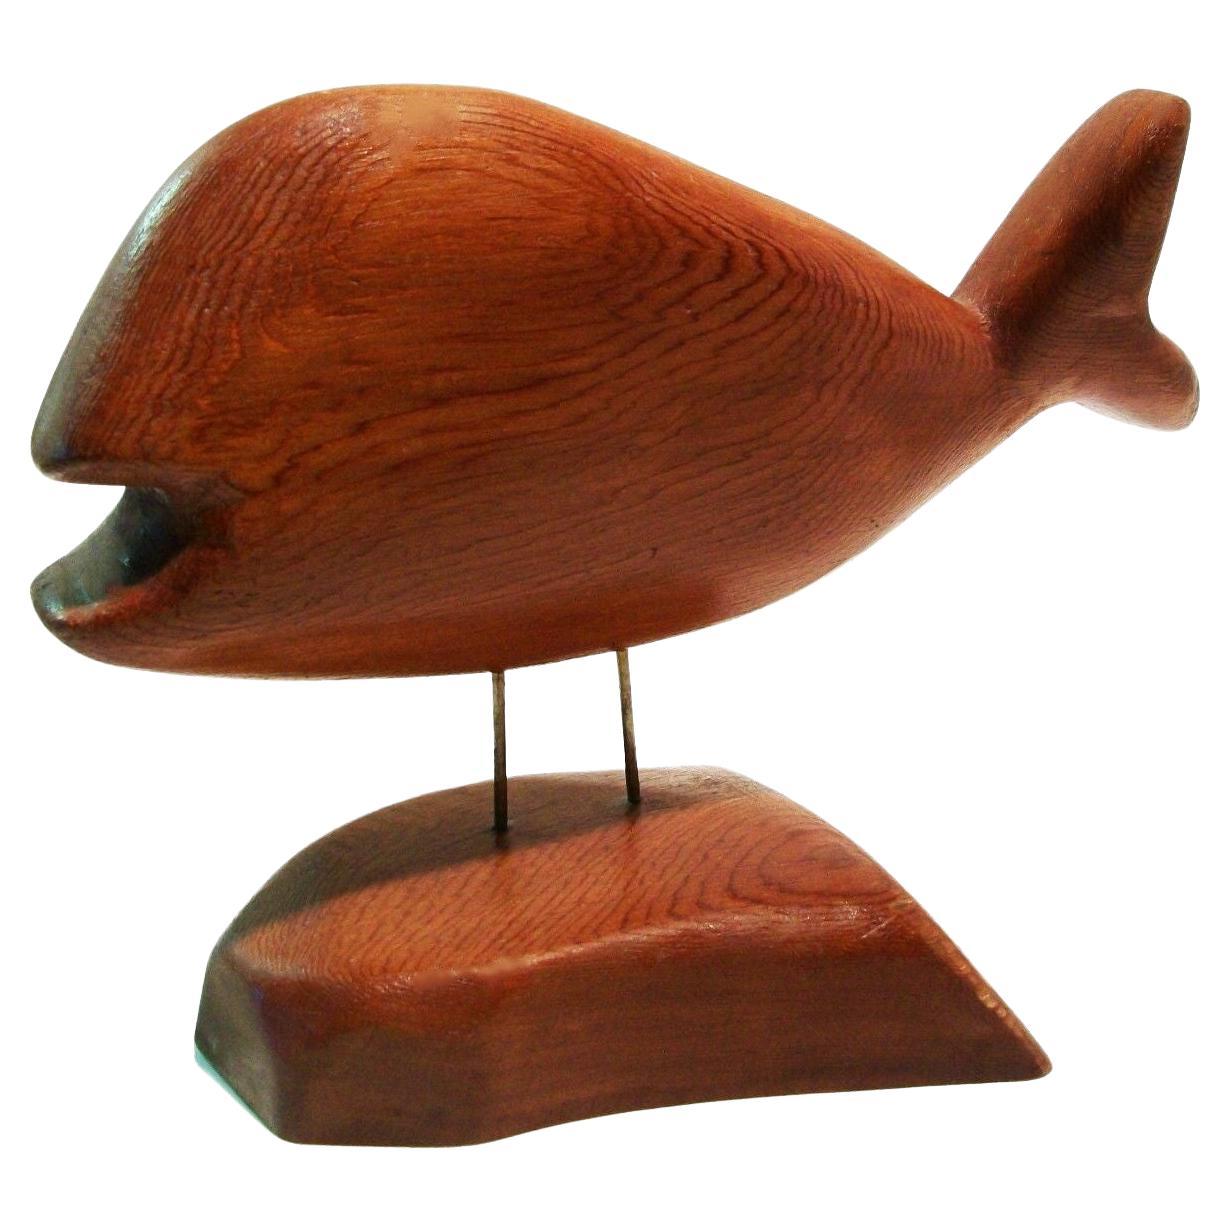 MIKE MATAS - Vintage Folk Art Whale Carving on Stand - Signé - Canada - C.C. 1980